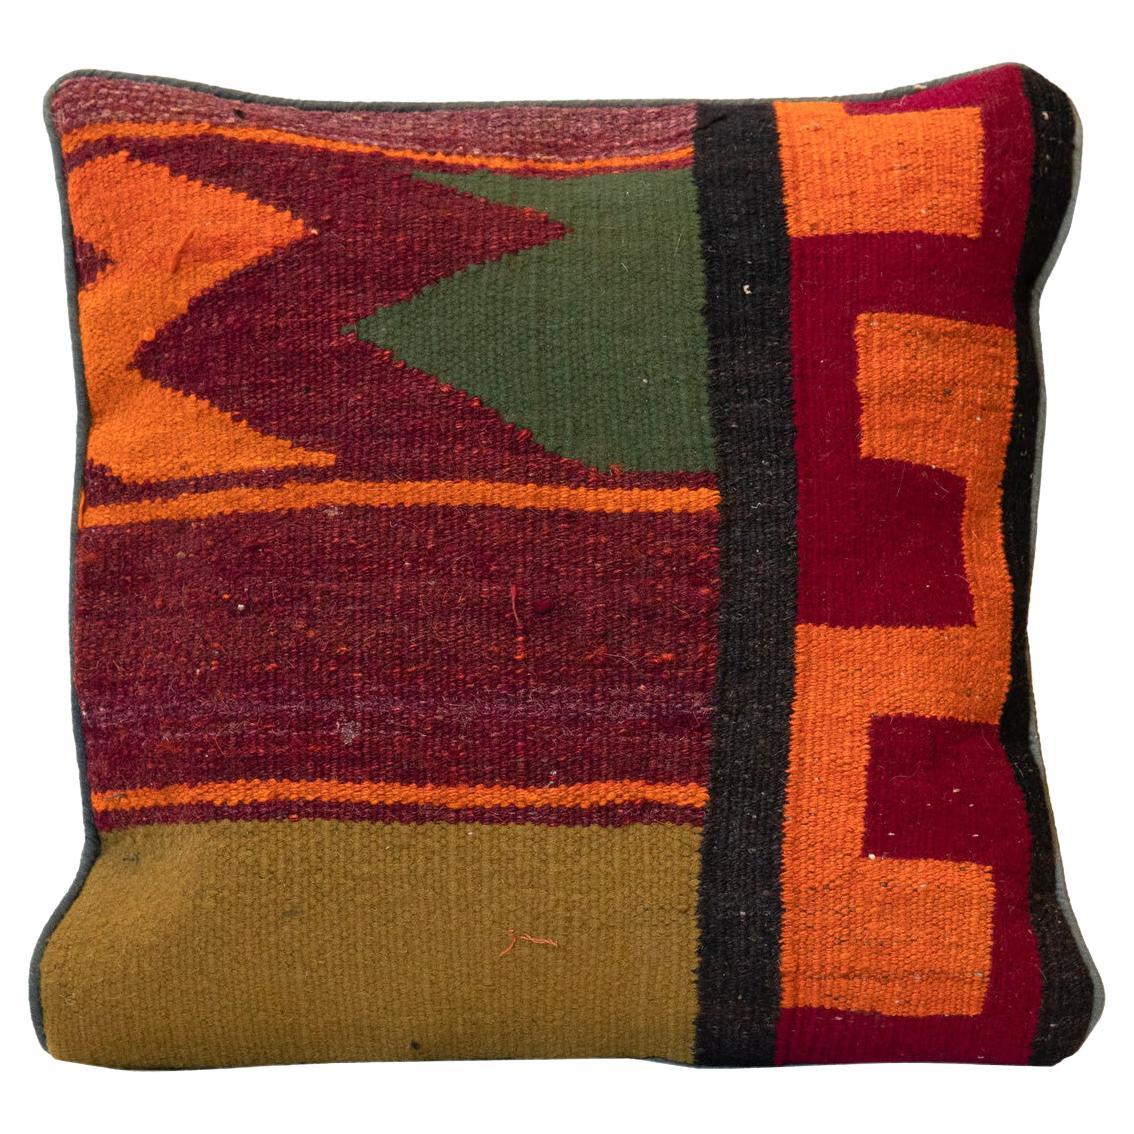 Tribal Style Kilim Cushion Cover Handmade Orange Red Traditional Wool Pillow 